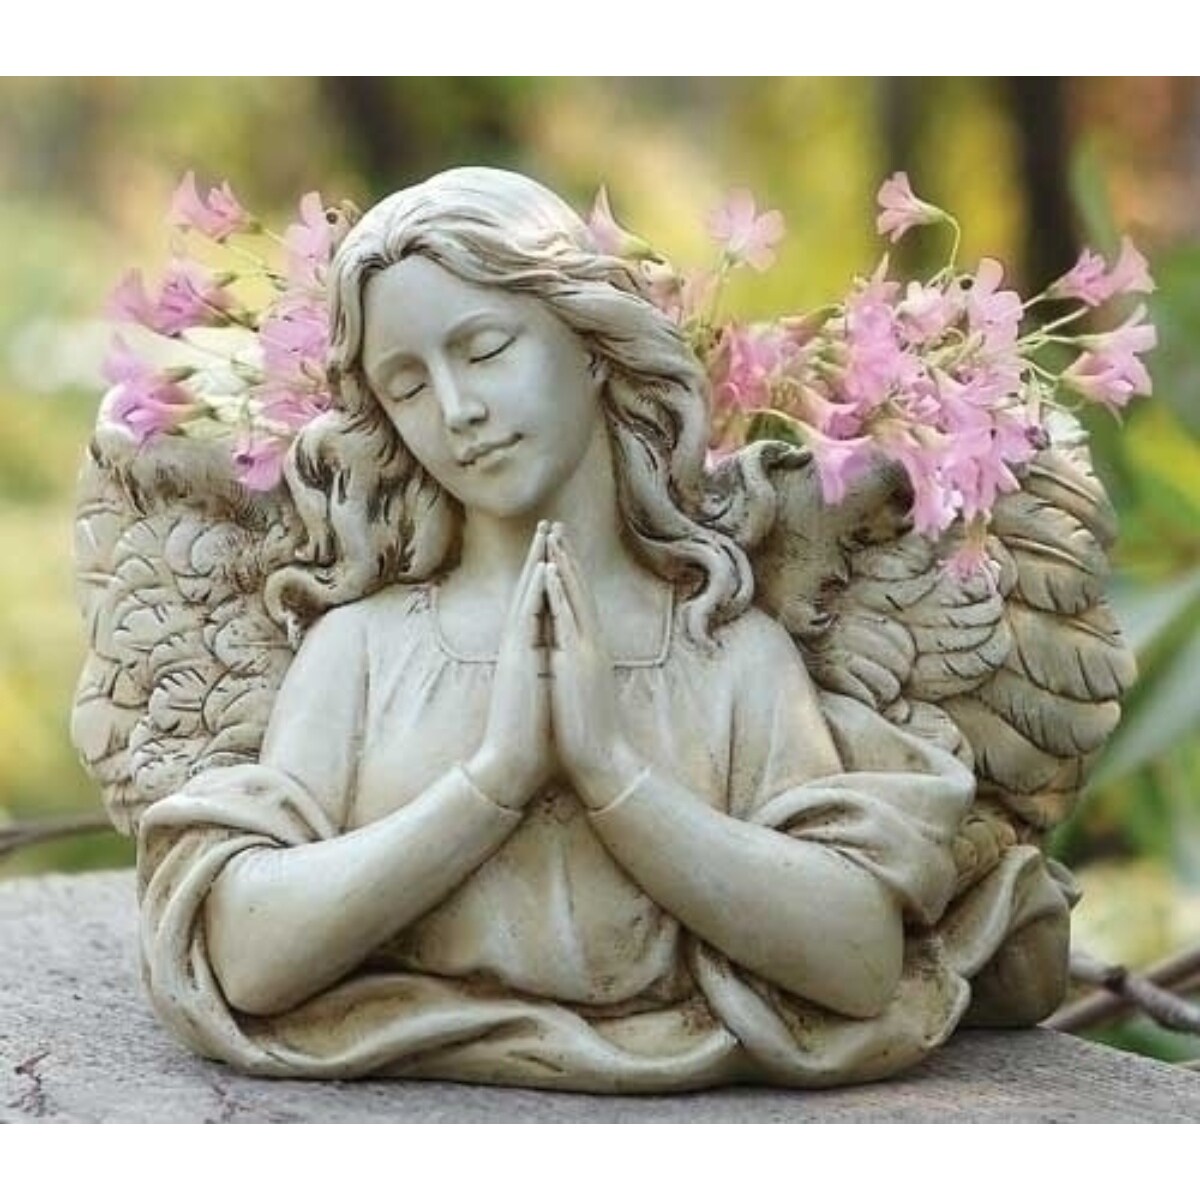 Olive Praying Ange with Wing 6.5 x 8.5 Resin Decorative Outdoor Standing Planter